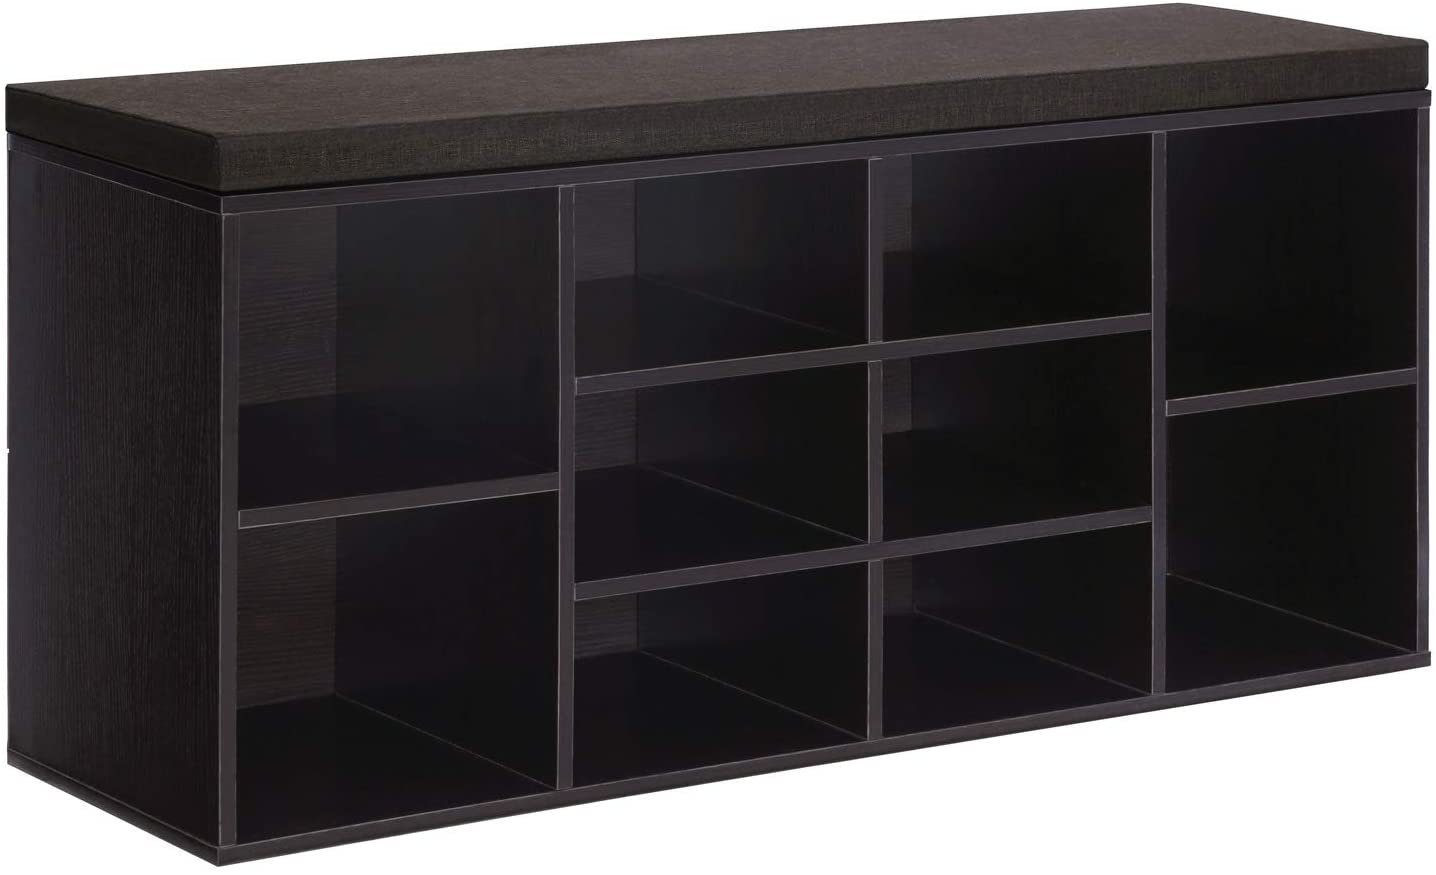 Cubbie Shoe Cabinet Storage Bench with Cushion, Adjustable Shelves, Holds up to 440lb - HWLEXTRA 